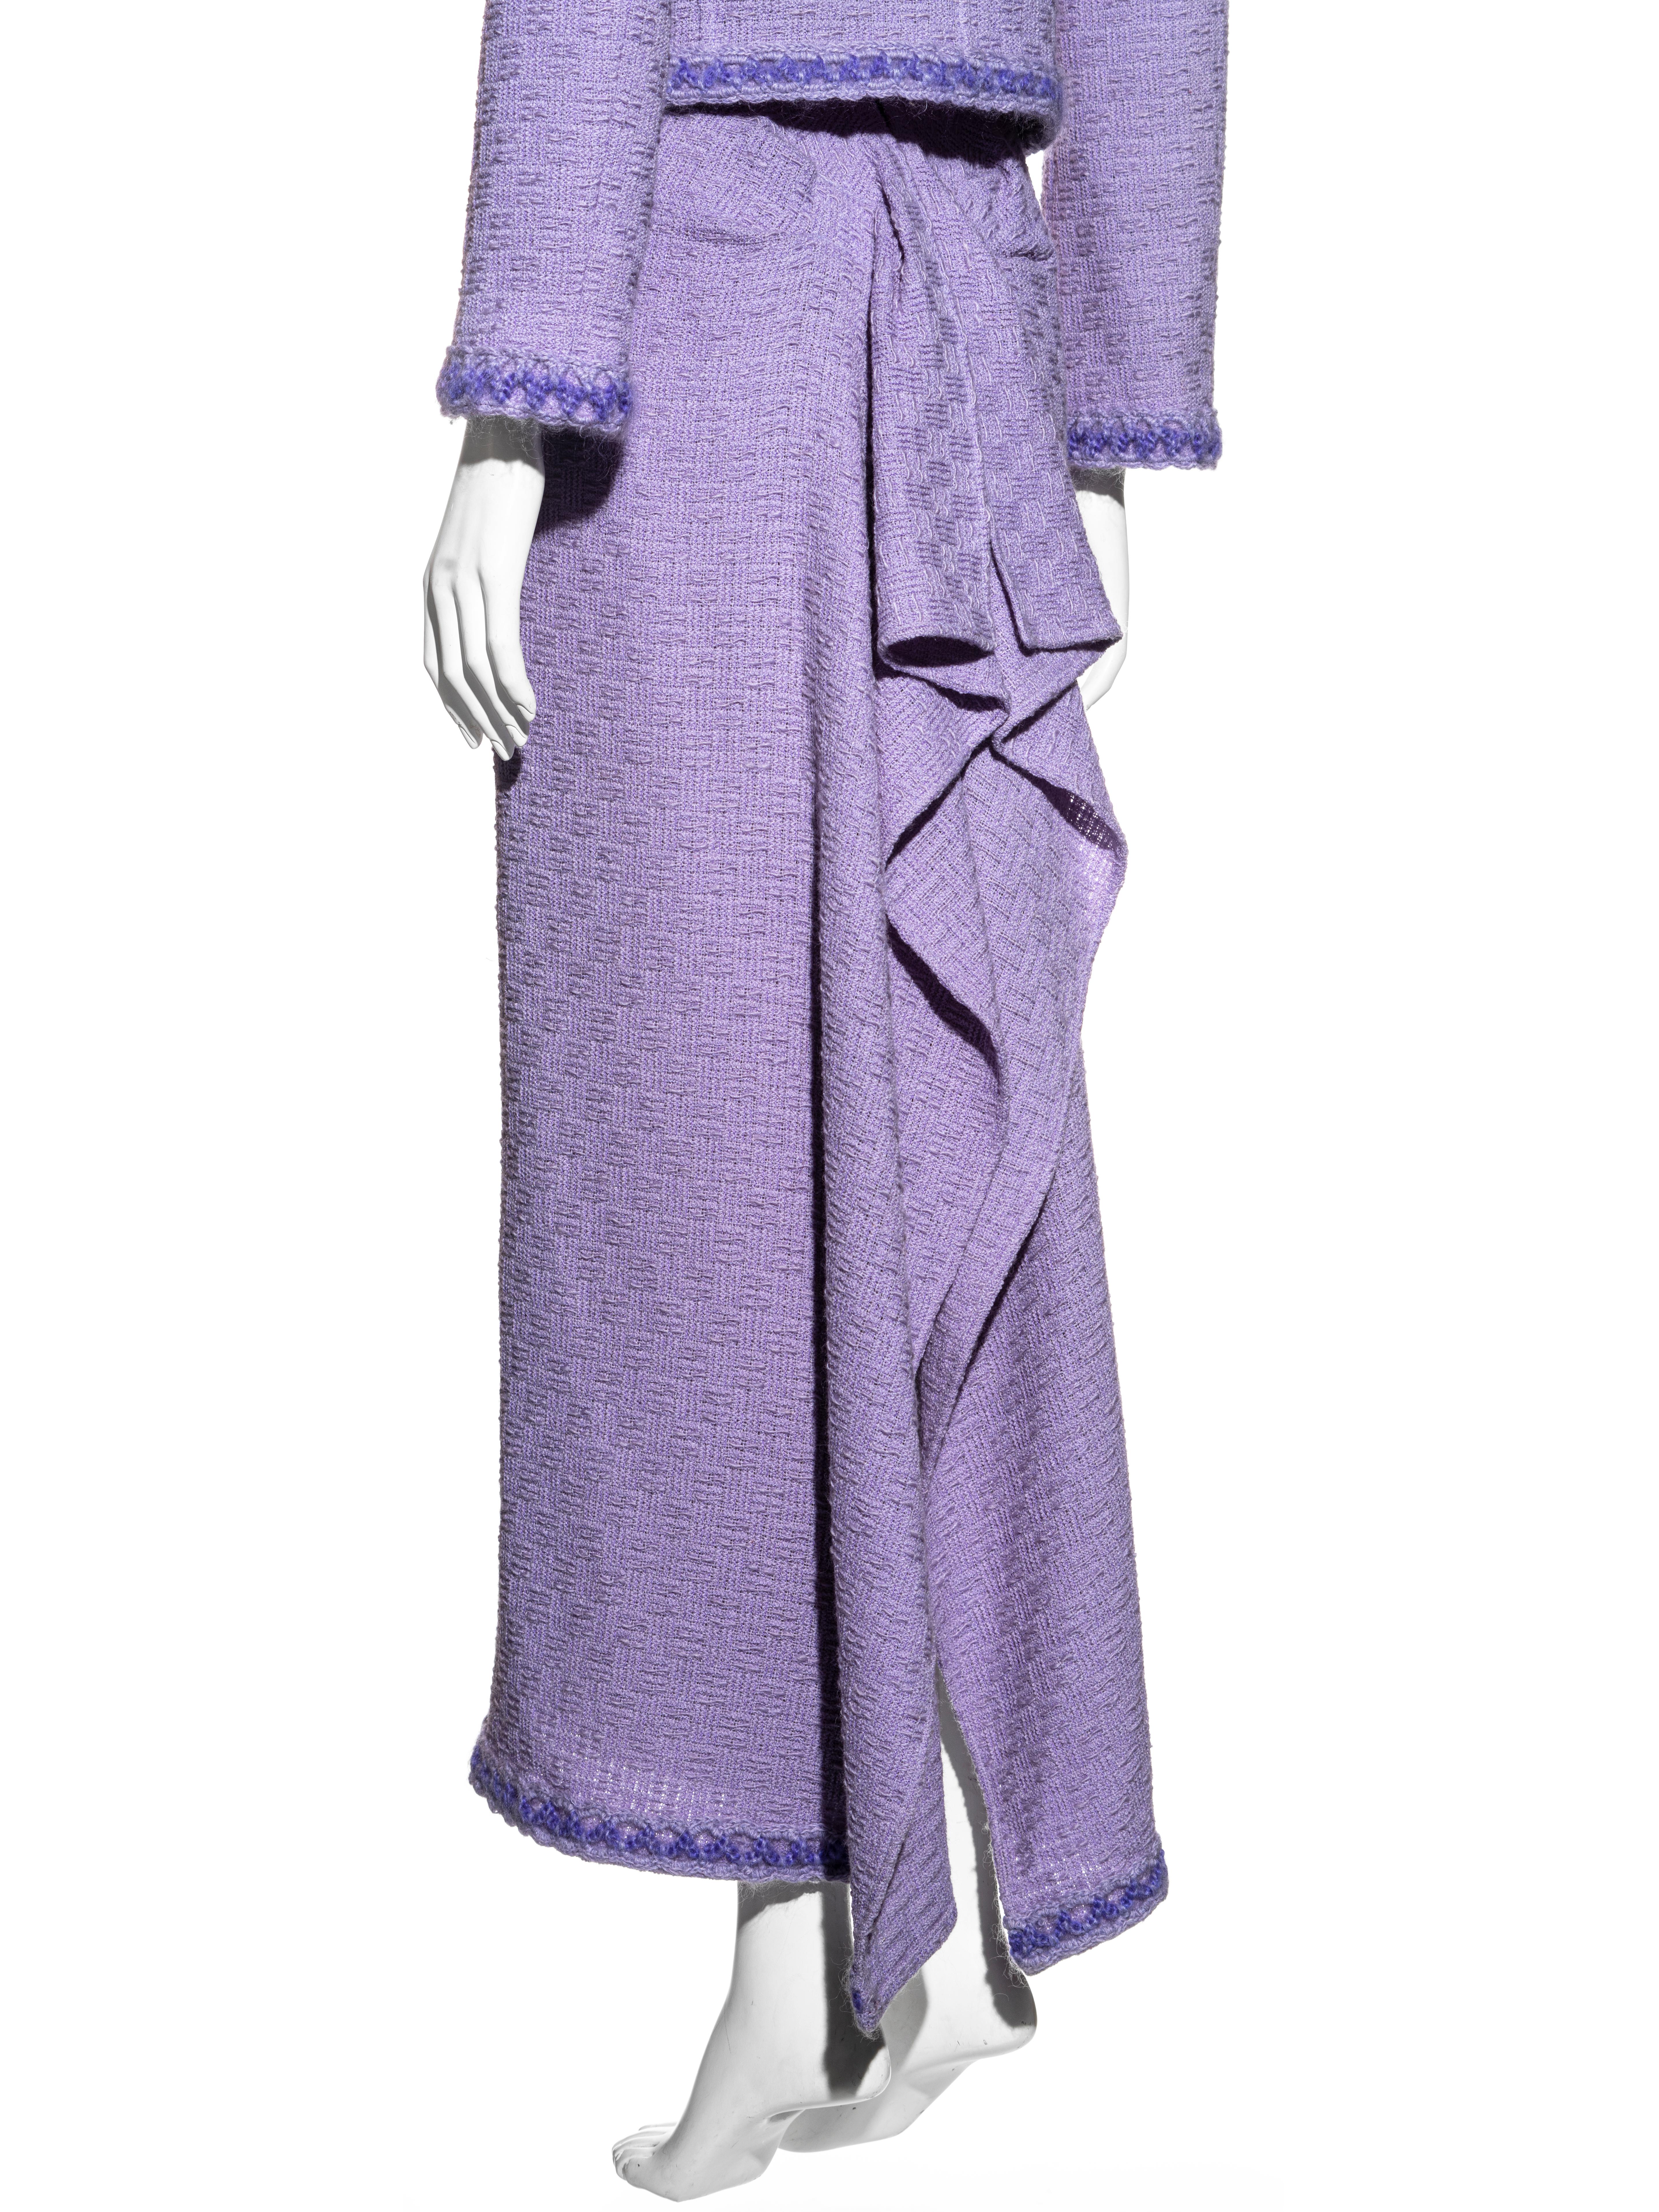 Chanel by Karl Lagerfeld lilac tweed jacket and maxi skirt suit, fw 1998 For Sale 6